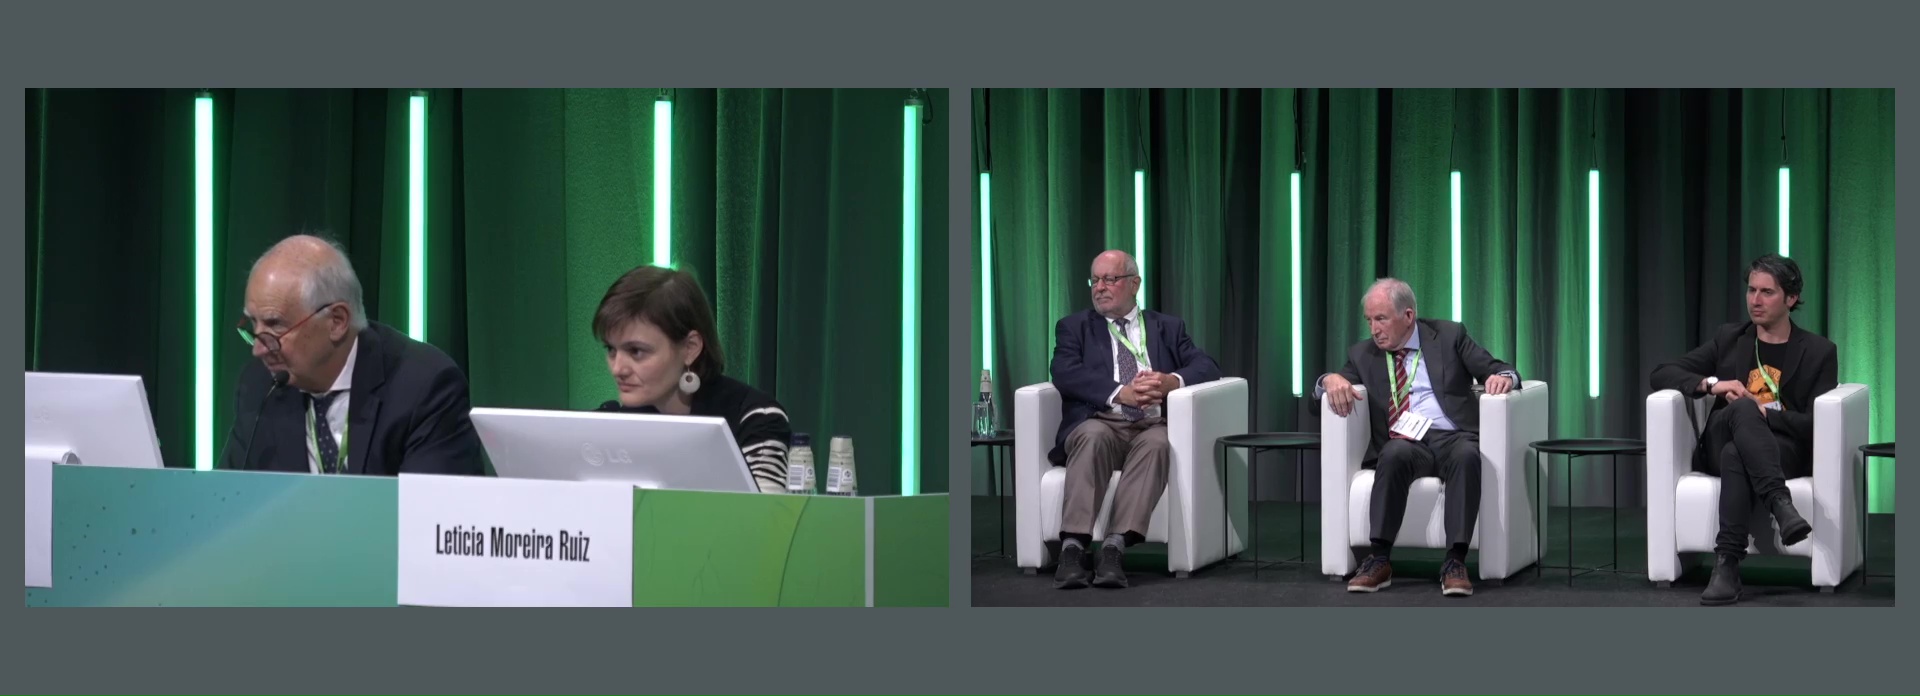 Panel discussion: 40 years of H. pylori - Back to the future